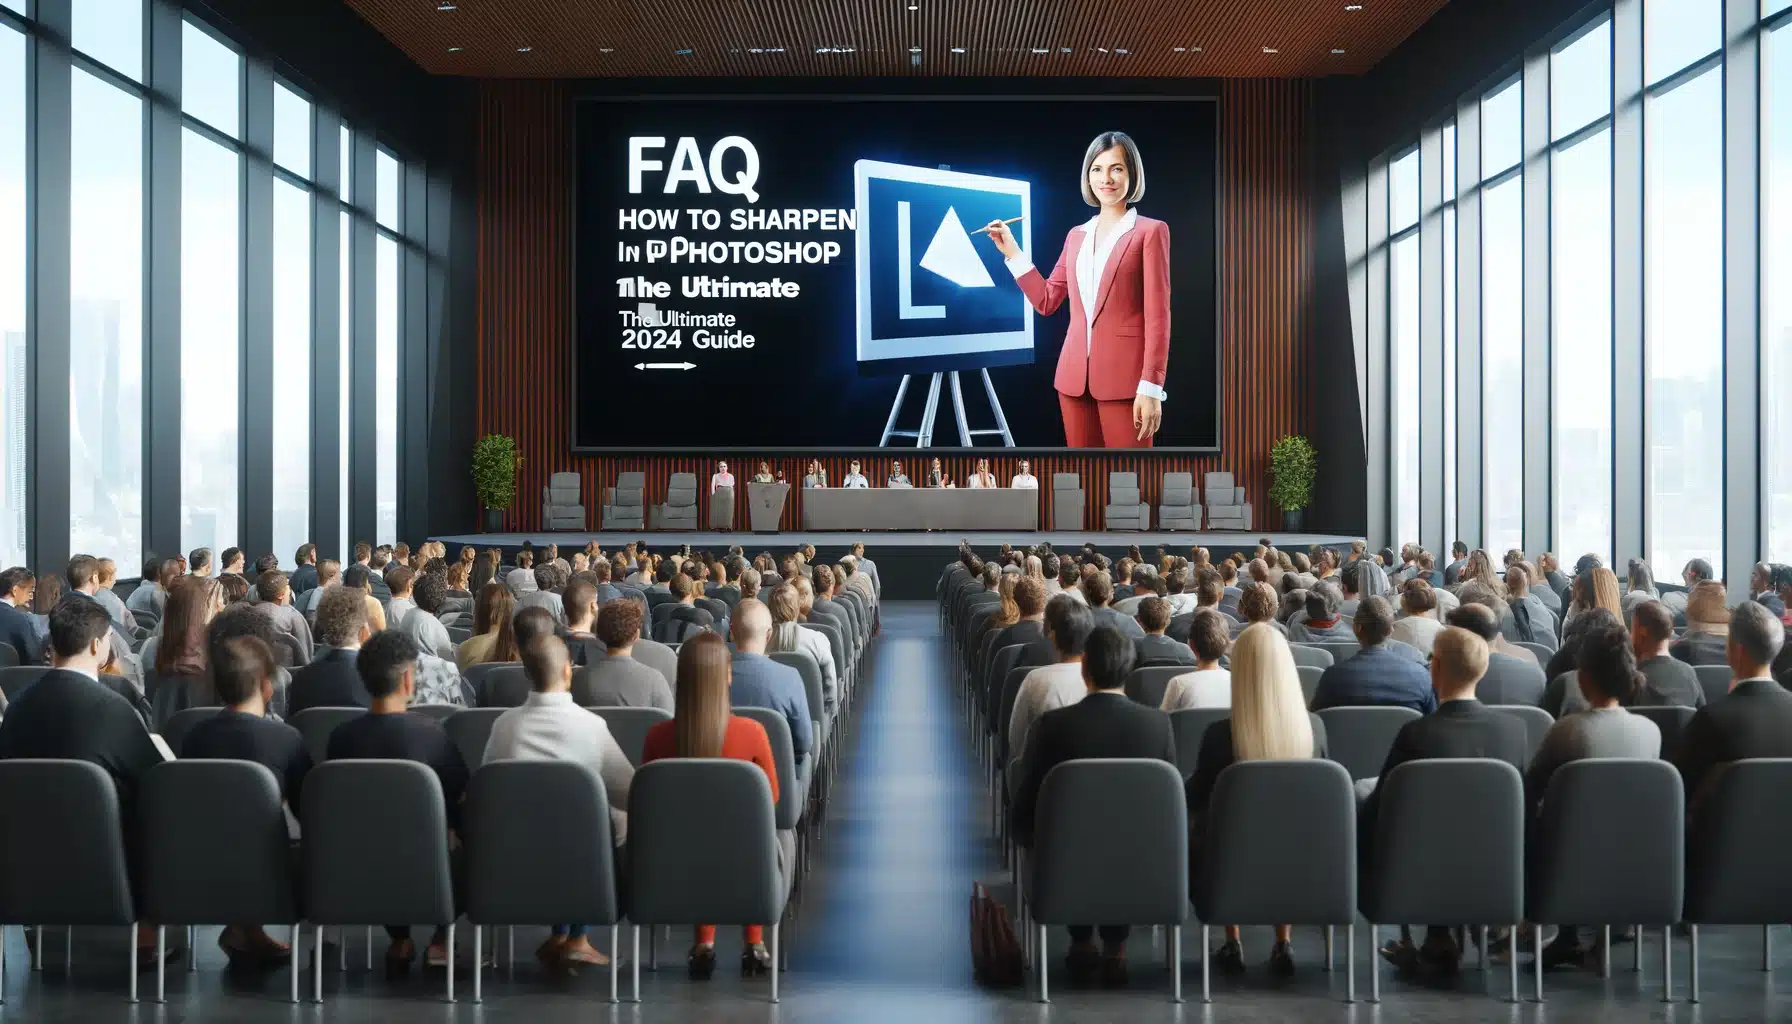 A woman presenting a PS Acuminating Mentor on a large screen in a conference hall, with an attentive diverse audience.